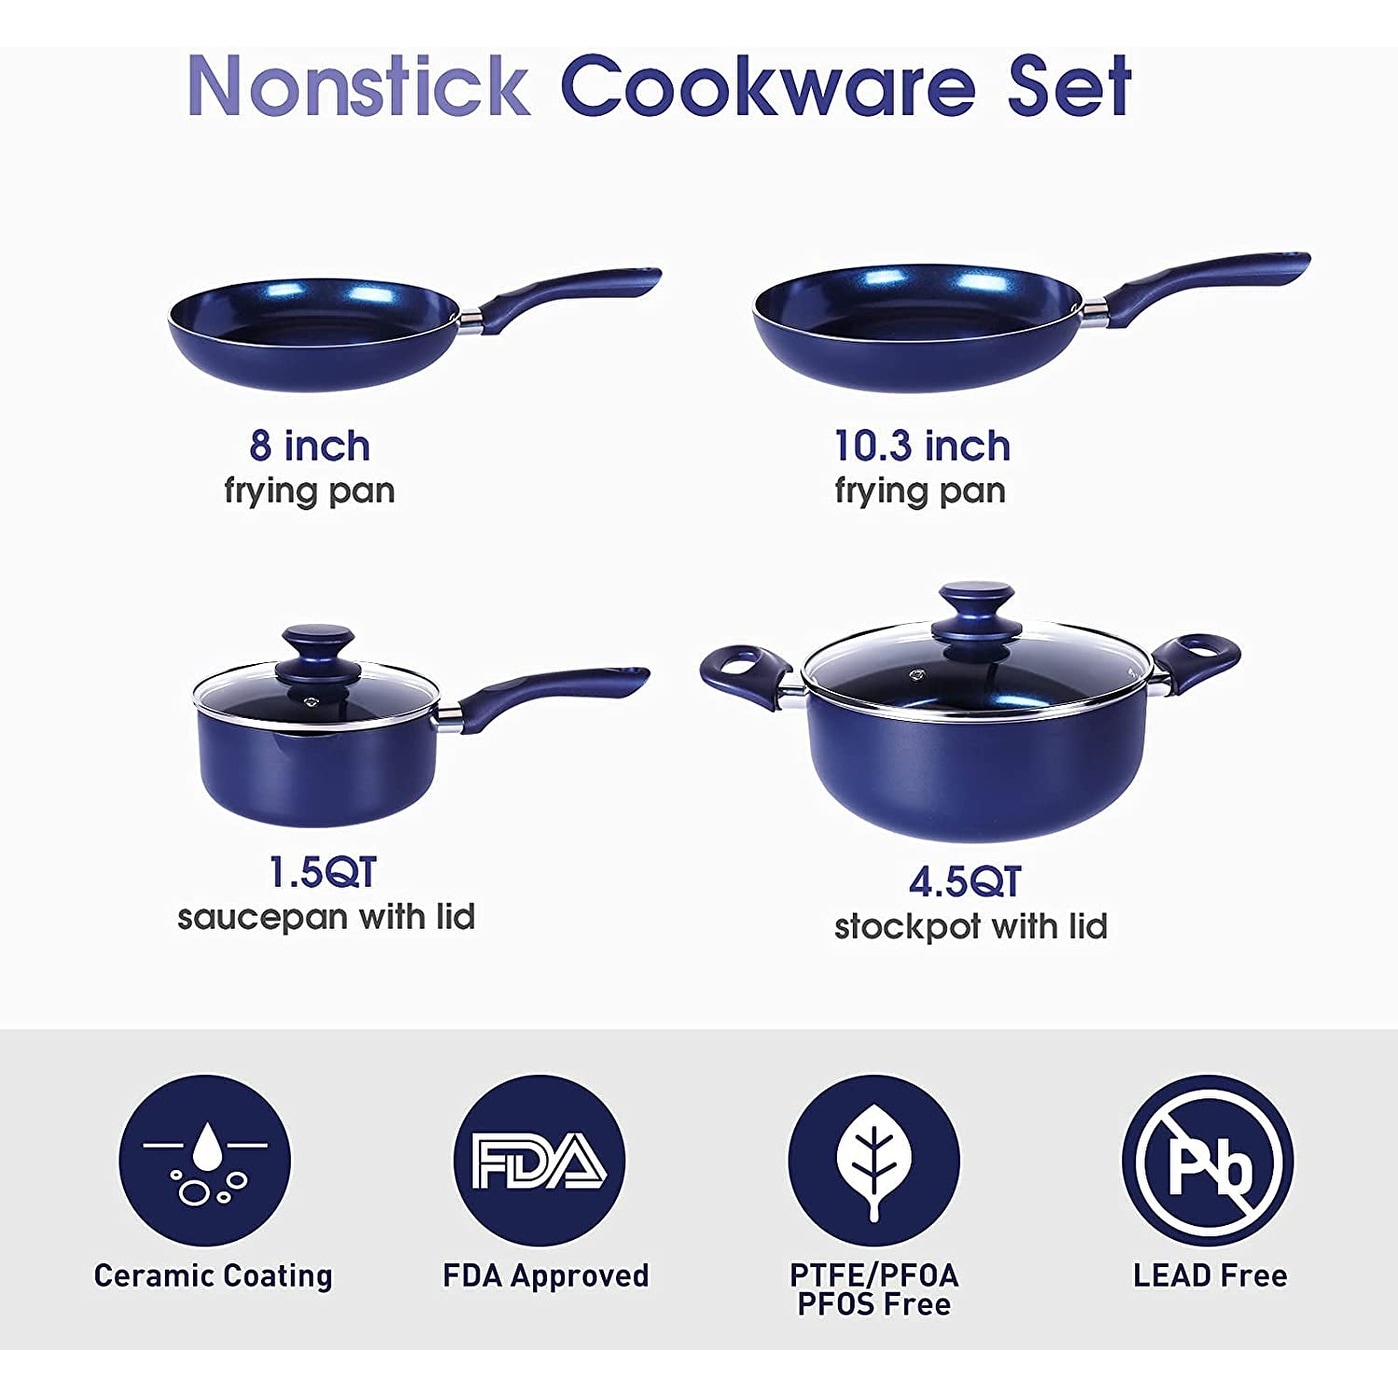 https://ak1.ostkcdn.com/images/products/is/images/direct/564e07dee7bcc18c4993dadfdc7a1c991b393d1e/6-piece-Non-stick-Cookware-Set-Pots-and-Pans-Set-for-Cooking---Ceramic-Coating-Saucepan%2C-Stock-Pot-with-Lid%2C-Frying-Pan%2C-Copper.jpg